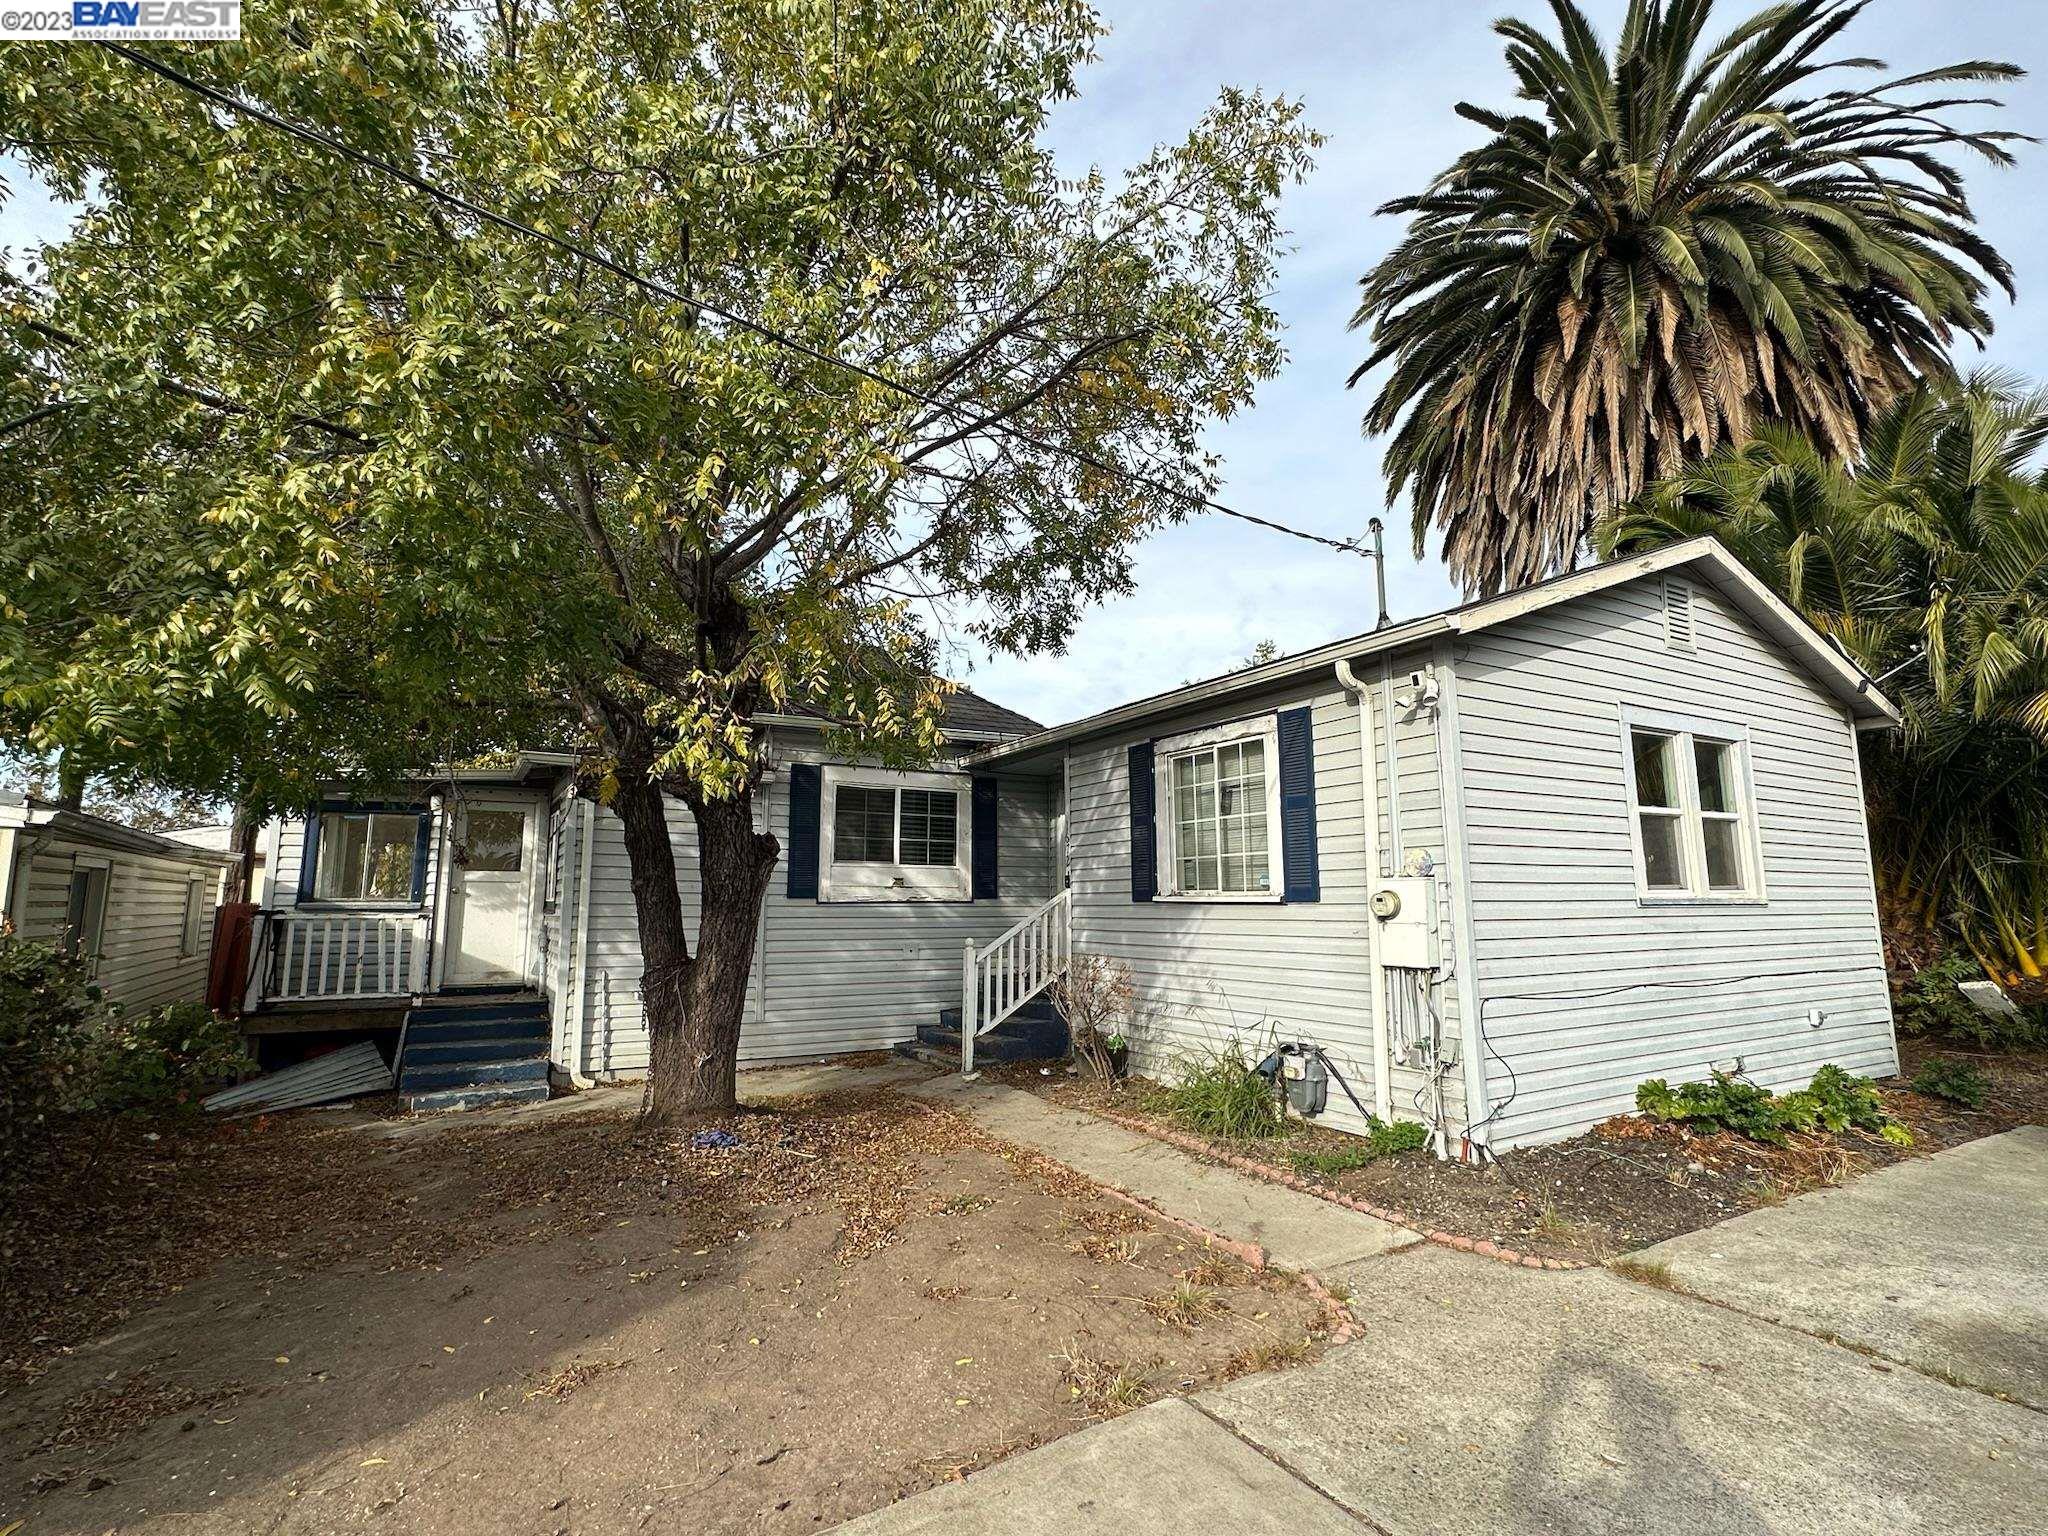 Discover the potential of Broadway St, Vallejo - a 2-bed, 2-bath fixer-upper waiting for your creative touch. This charming cottage invites you to envision and transform it into your dream home. With character and possibilities abound, this property is a canvas for your unique vision. Seize the opportunity to craft a home that reflects your individuality on the vibrant canvas of Vallejo's historic Broadway Street. Your dream residence awaits, ready to be brought to life.